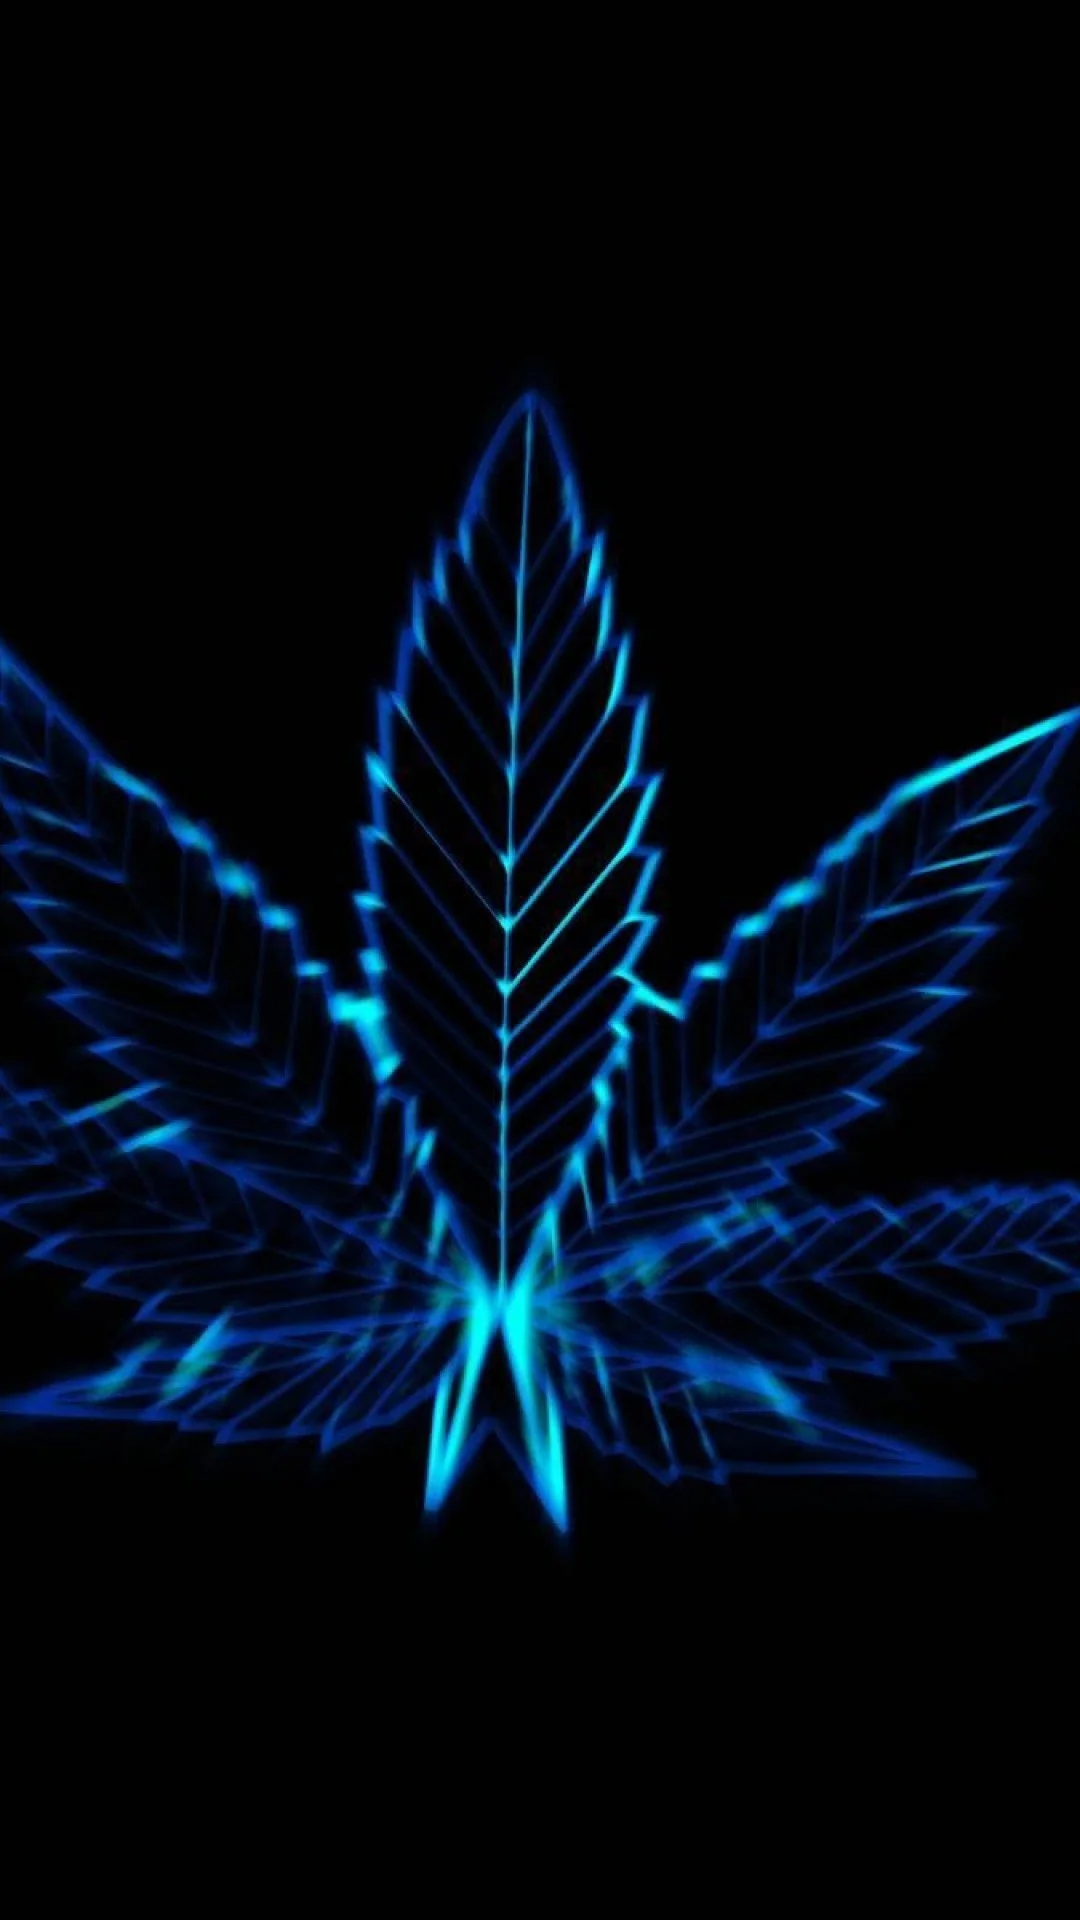 1080 x 1920 HD Wallpapers Abstract Find best latest 1080 x 1920 HD Wallpapers Abstract. Weed WallpaperDesktop BackgroundsMobile